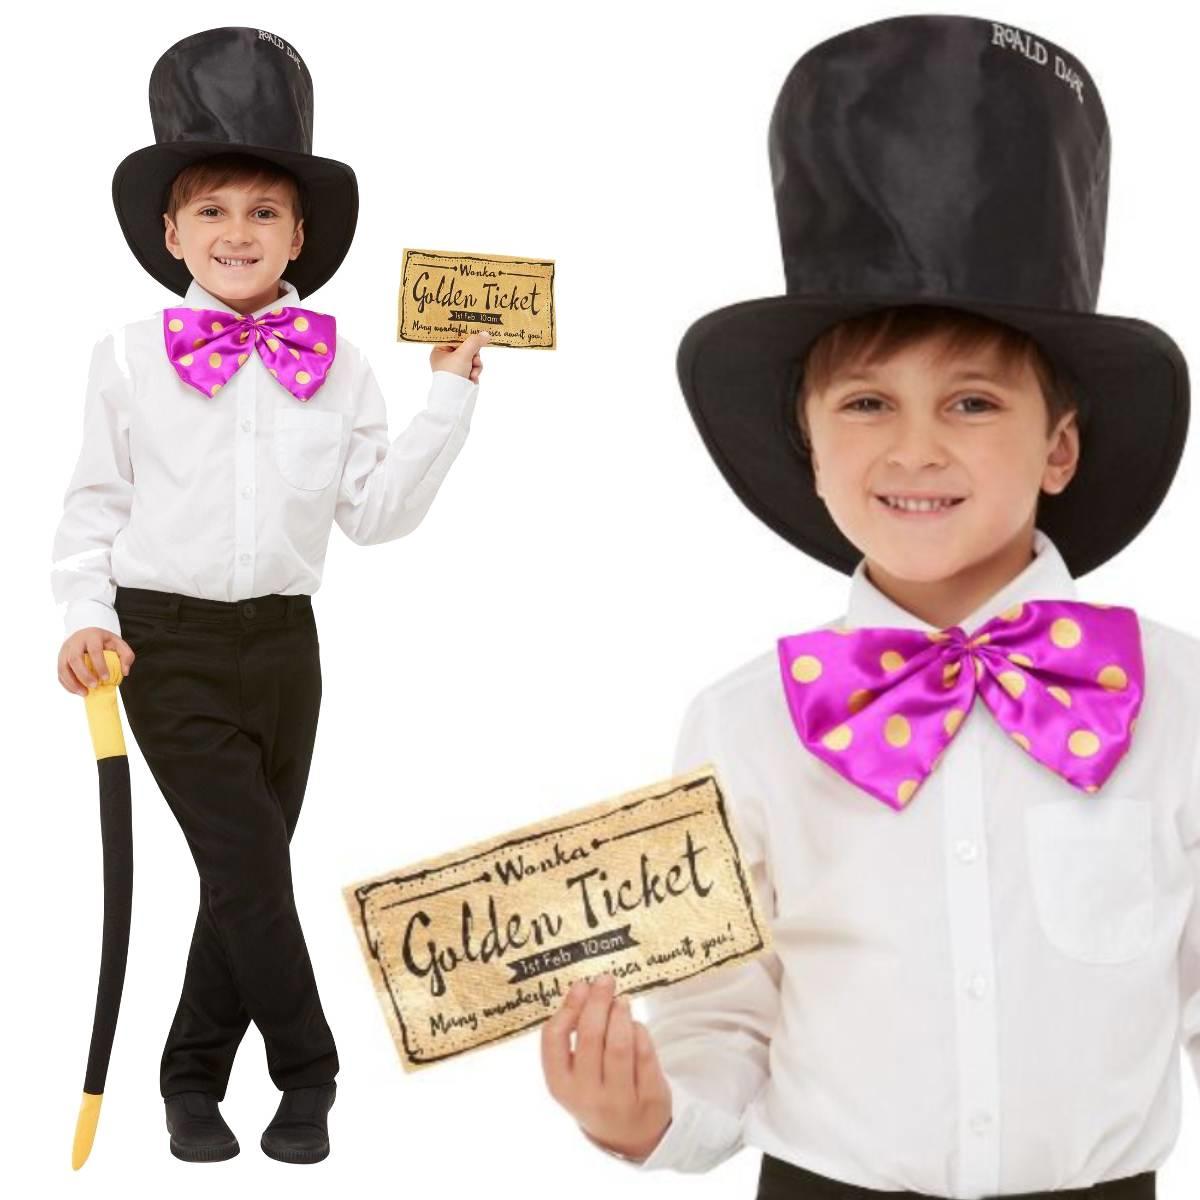 Willy Wonka Fancy Dress Costume Kit for Kids by Smiffys 50278 available here at Karnival Costumes online party shop